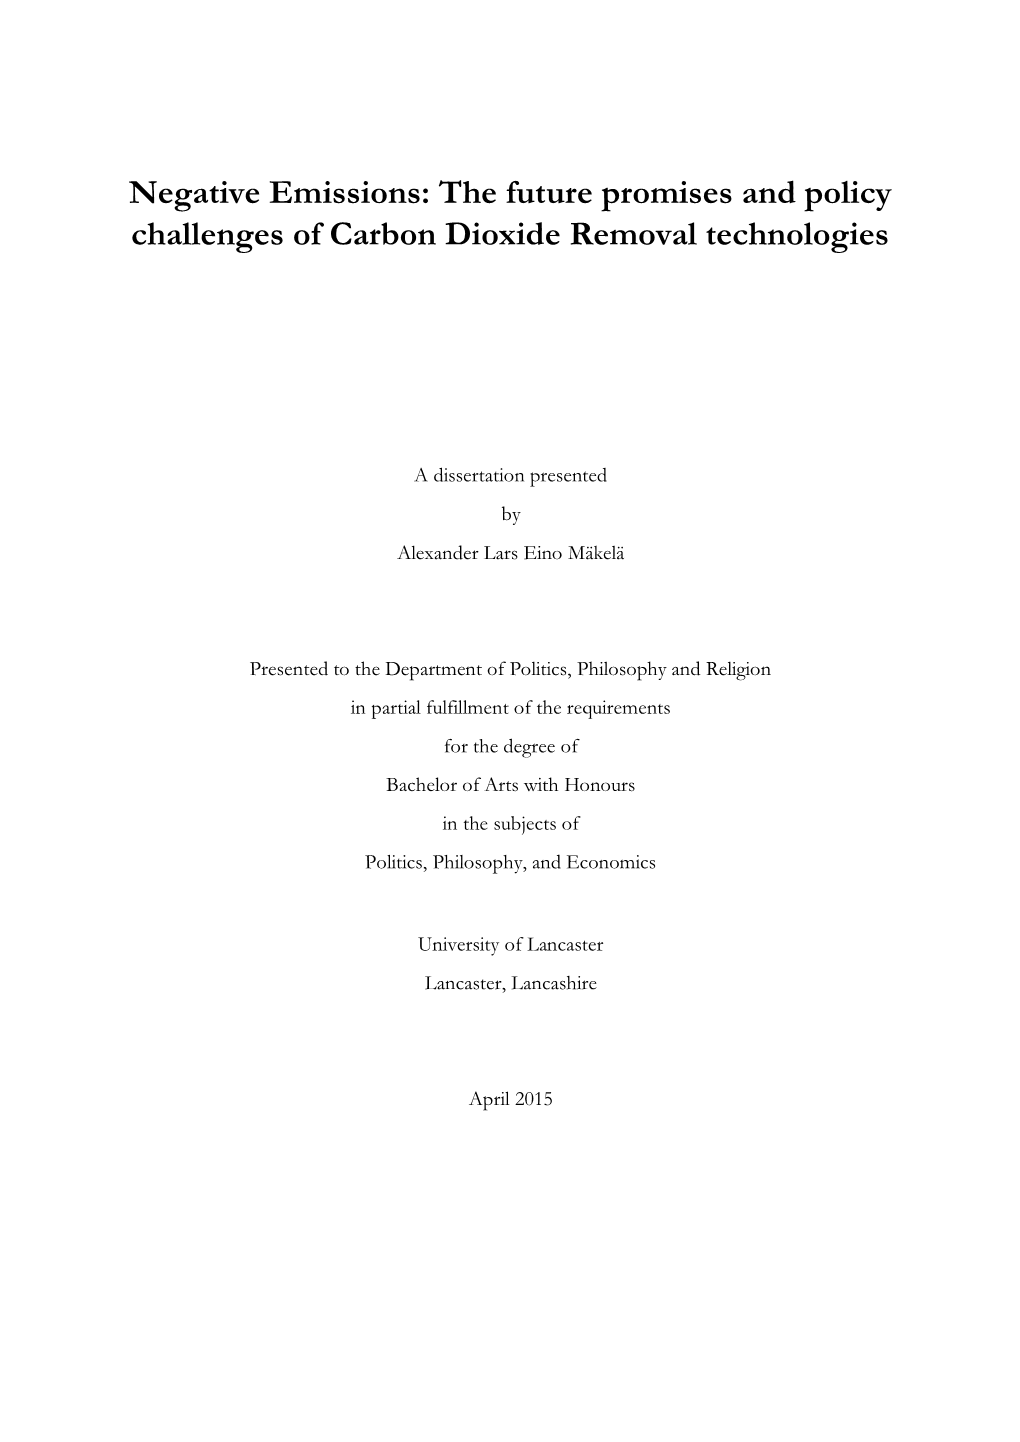 Negative Emissions: the Future Promises and Policy Challenges of Carbon Dioxide Removal Technologies